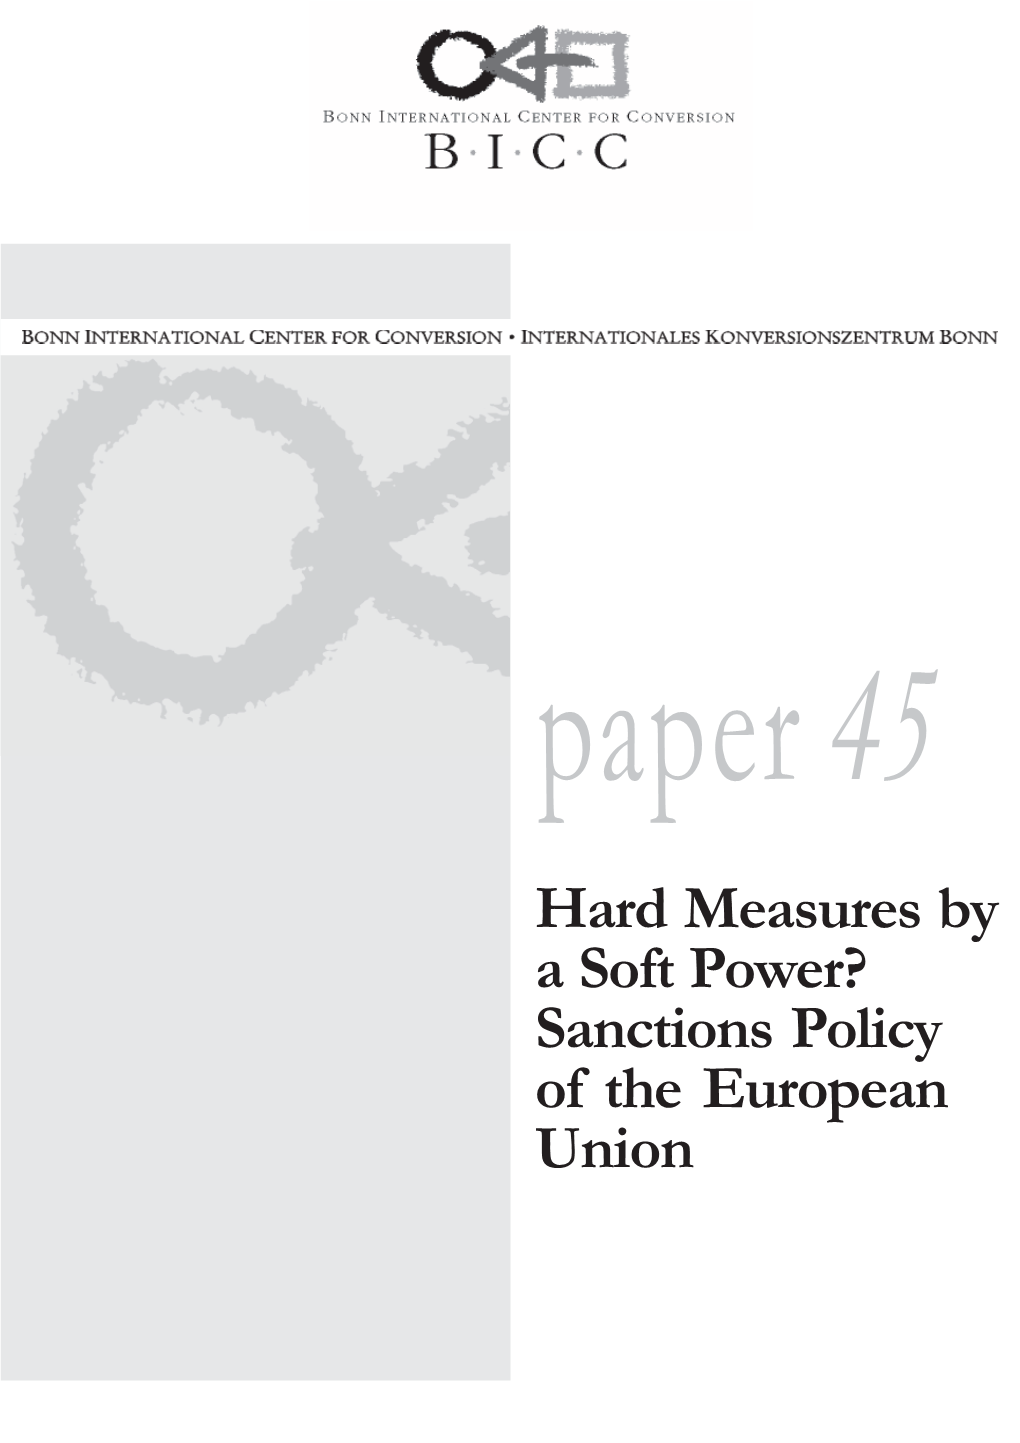 Hard Measures by a Soft Power? Sanctions Policy of the European Union Hard Measures by a Soft Power? Sanctions Policy of the European Union 1981—2004